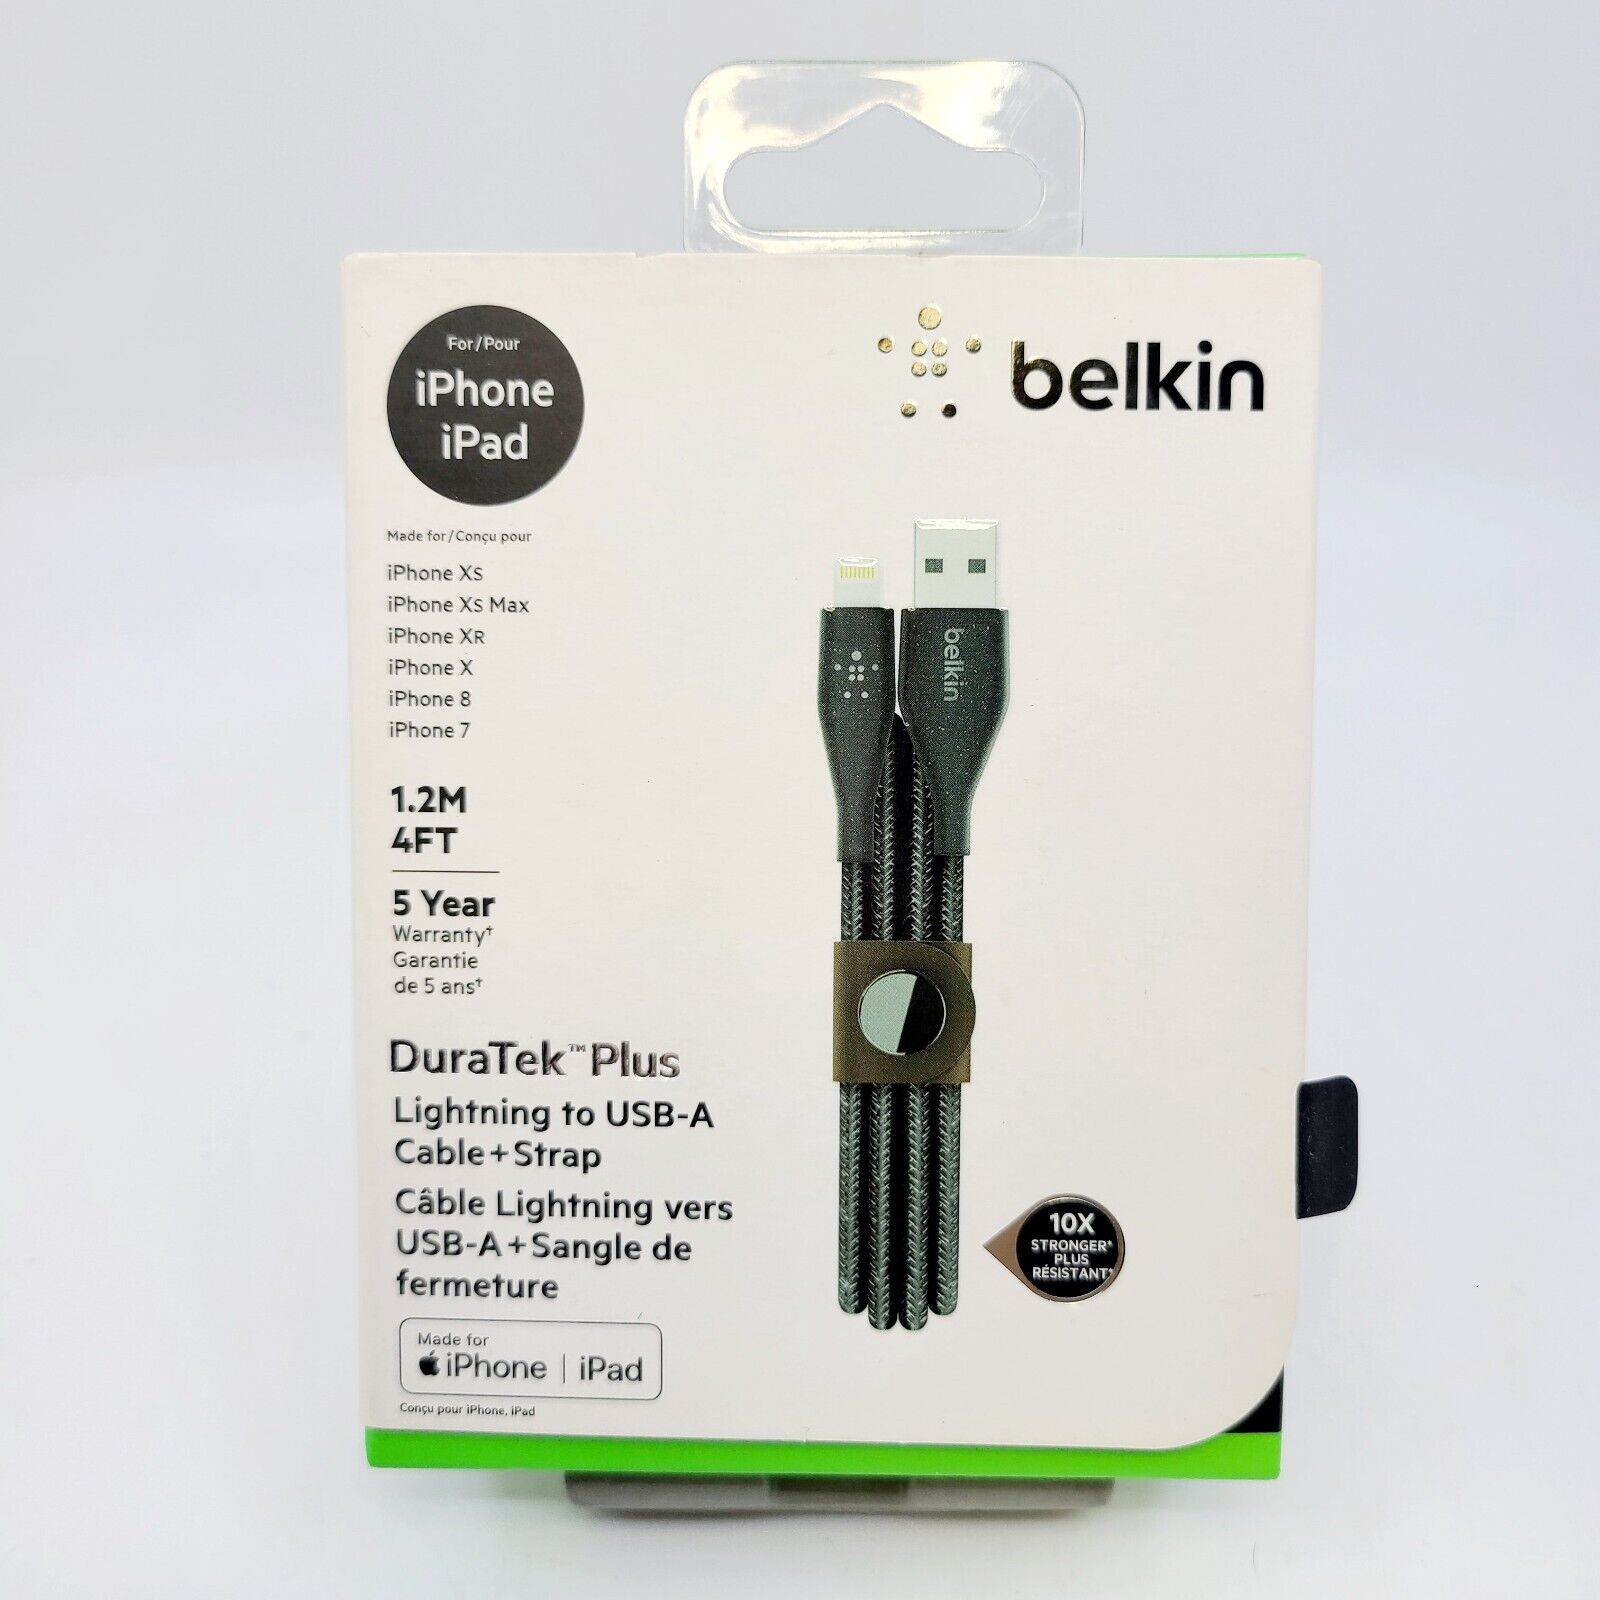 New Belkin DuraTek Plus Lightning to USB-A Cable with Strap F8J236BT06BLK